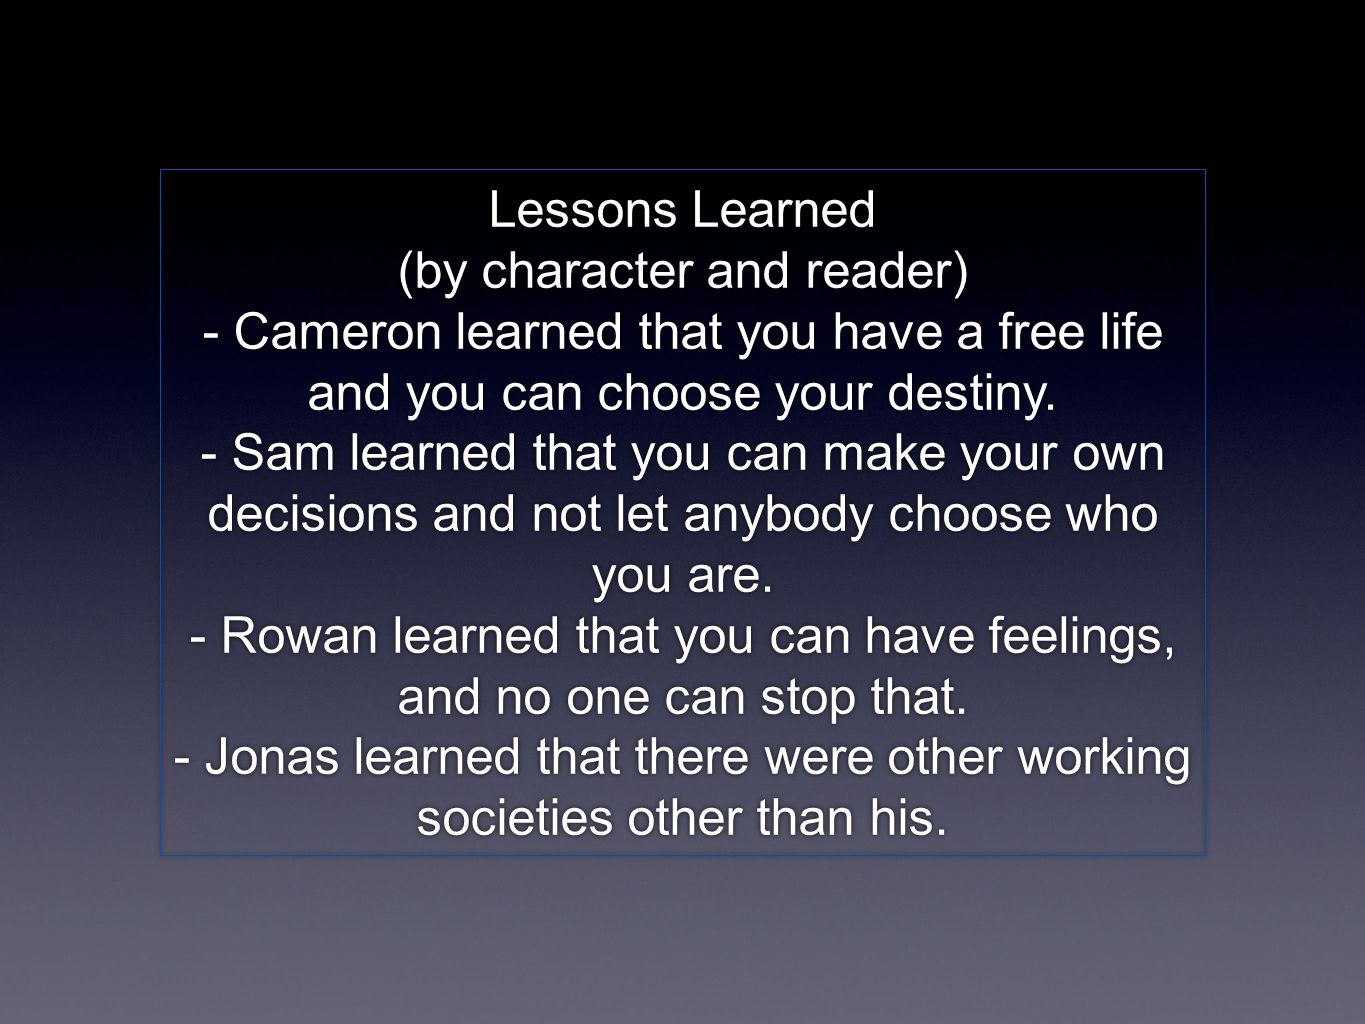 Lessons Learned (by character and reader) - Cameron learned that you have a free life and you can choose your destiny.